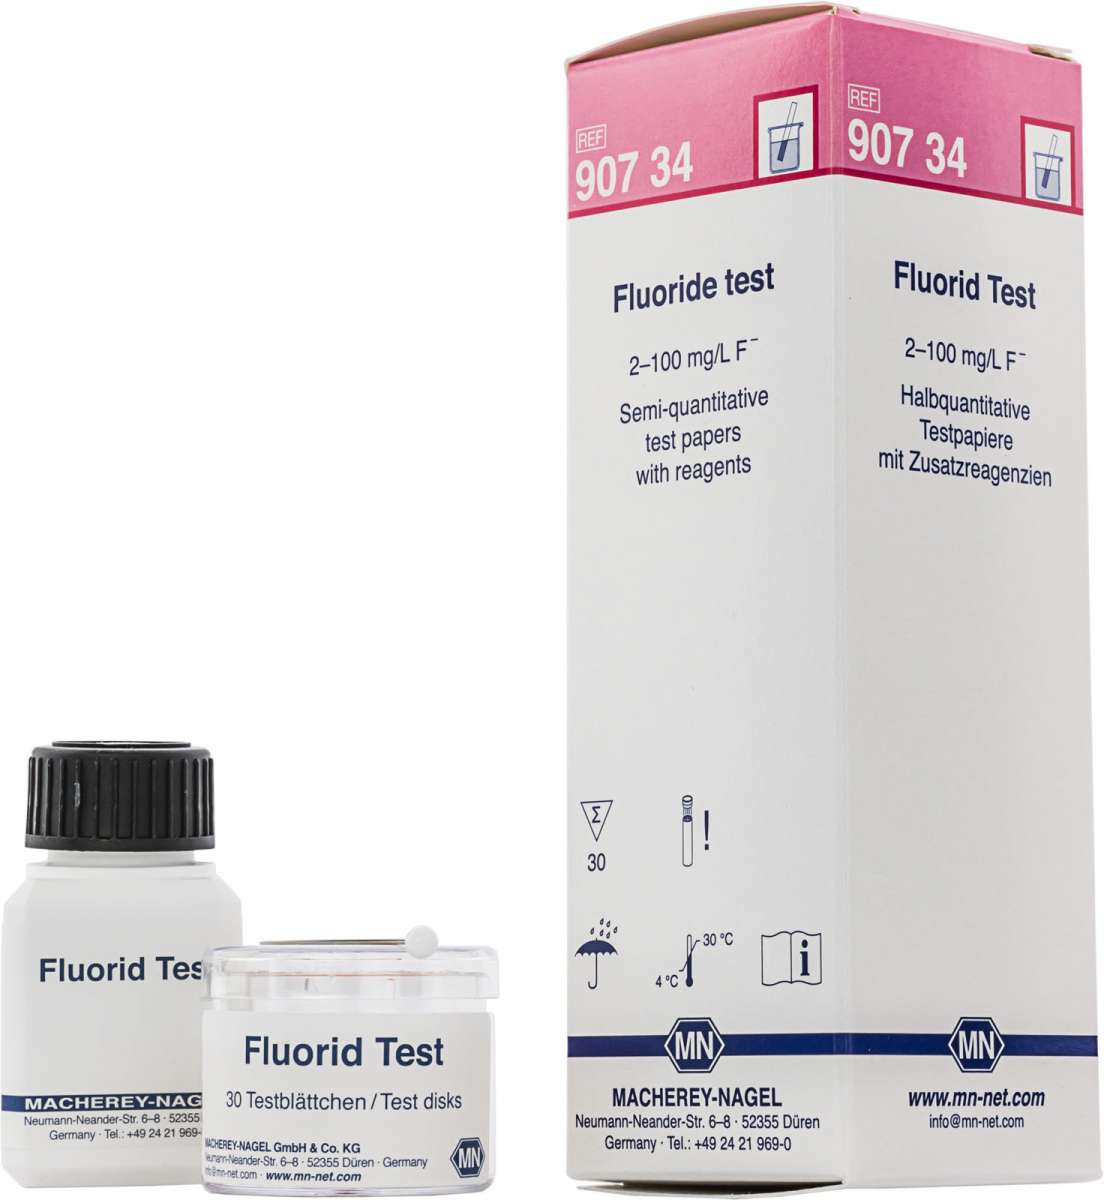 Fluoride Test (Box of 30 test discs, reagents and comparison chart)